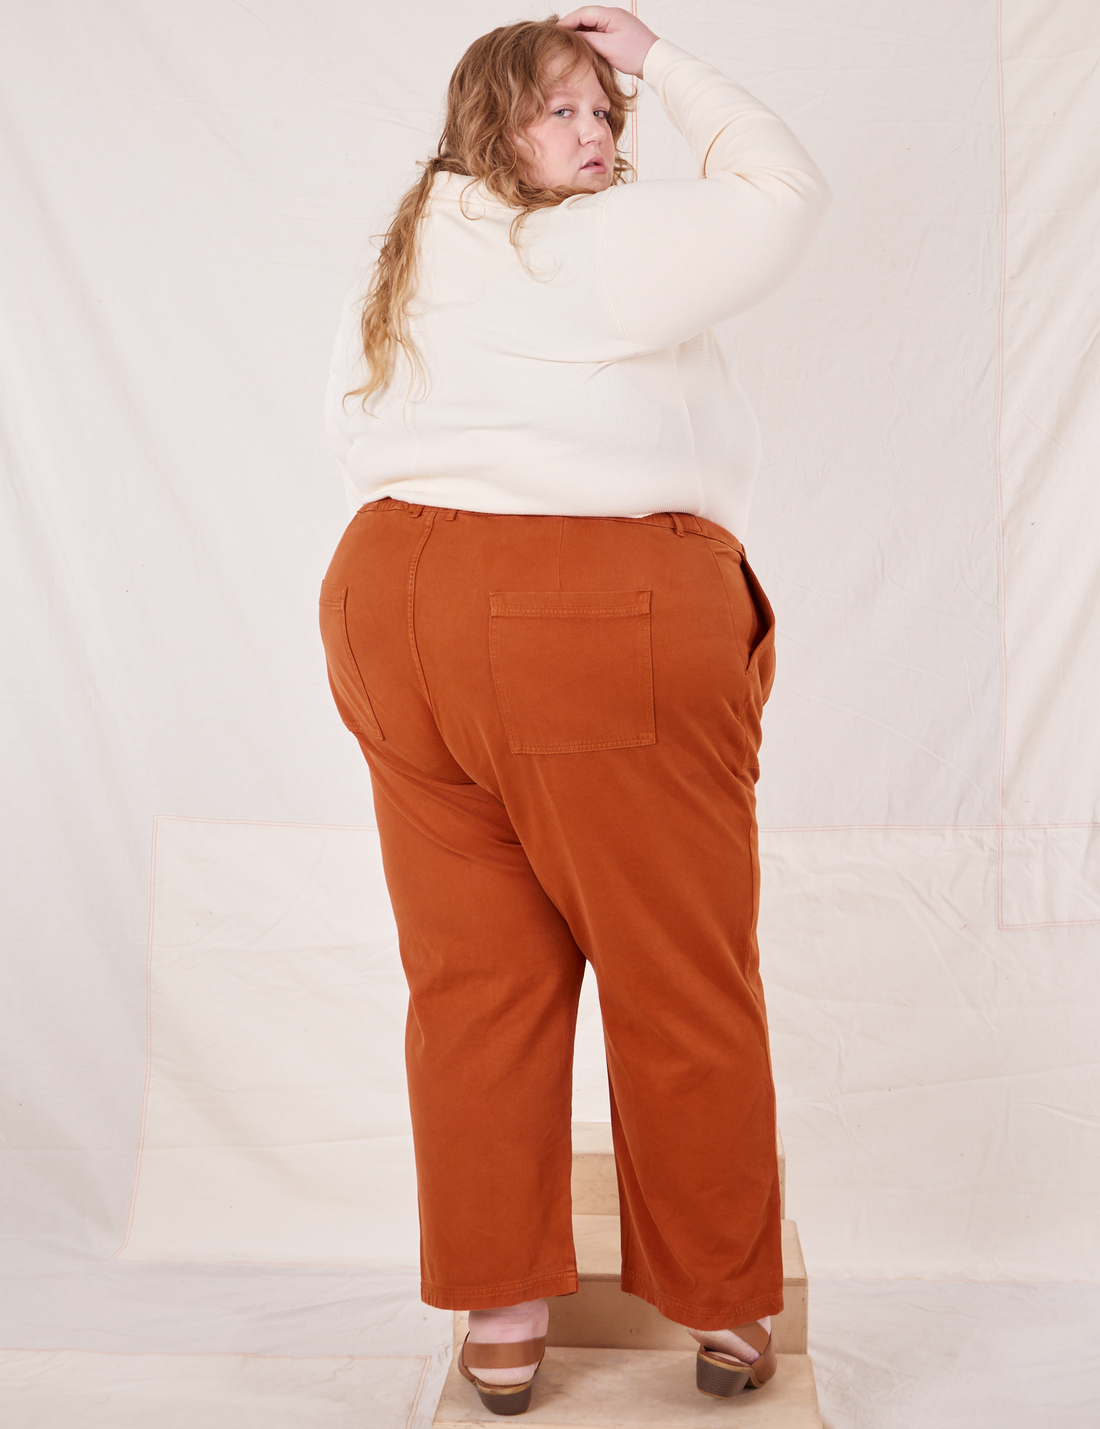 Organic Work Pants in Burnt Terracotta back view on Catie wearing vintage off-white Long Sleeve Fisherman Polo